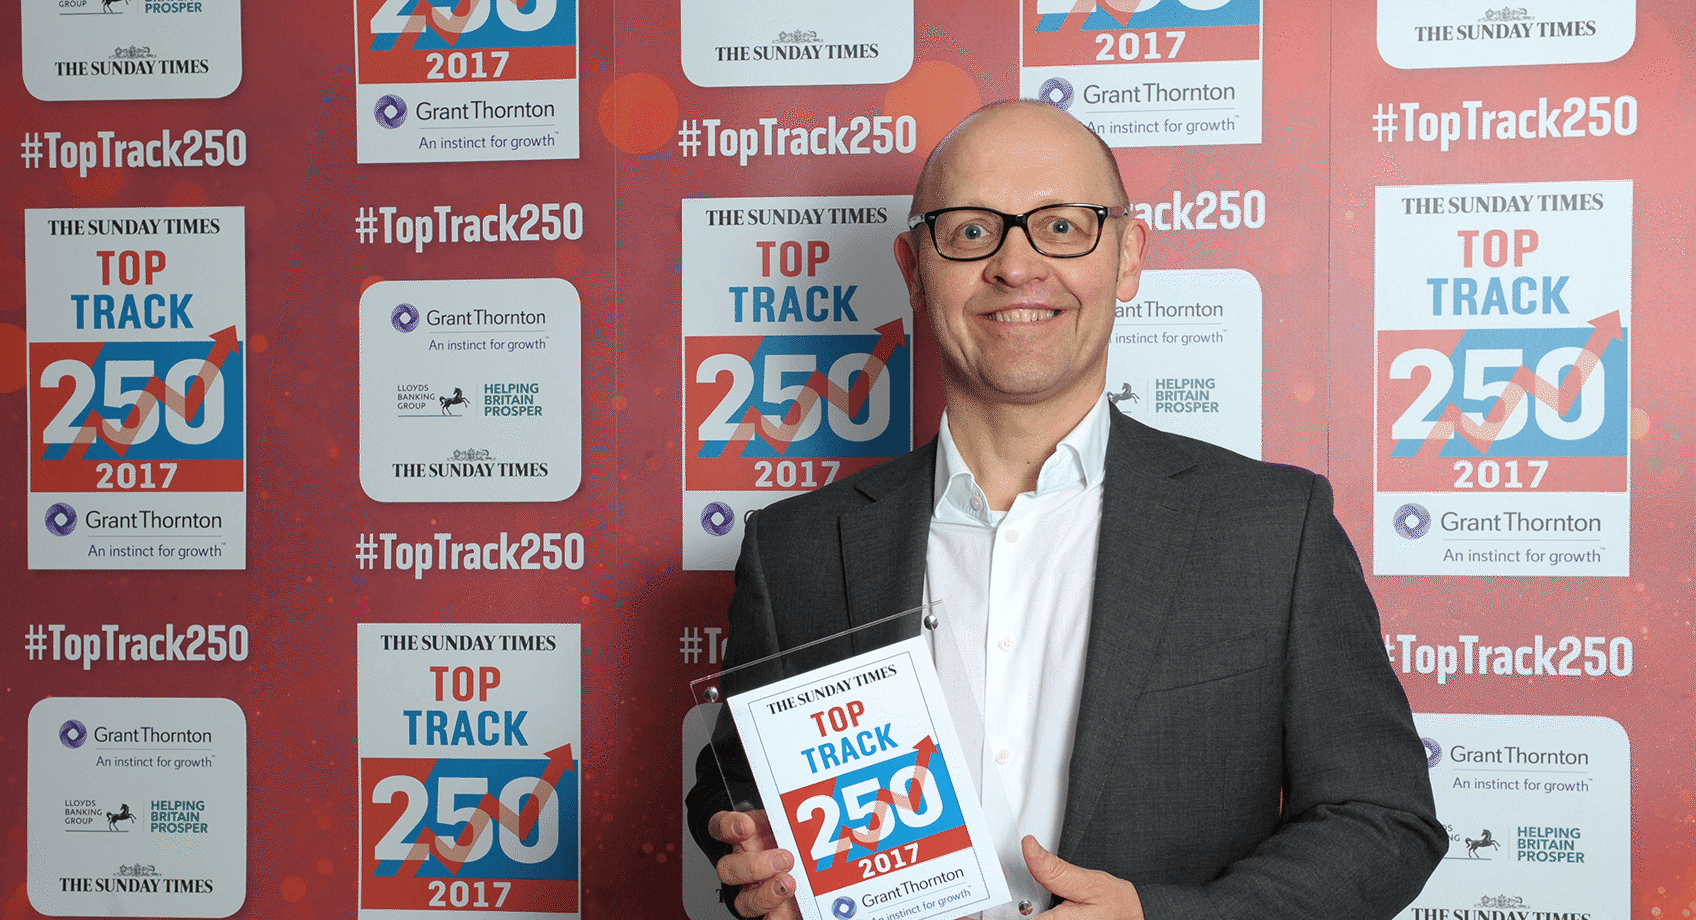 Sunday Times Top Track 250 Awards Dinner image